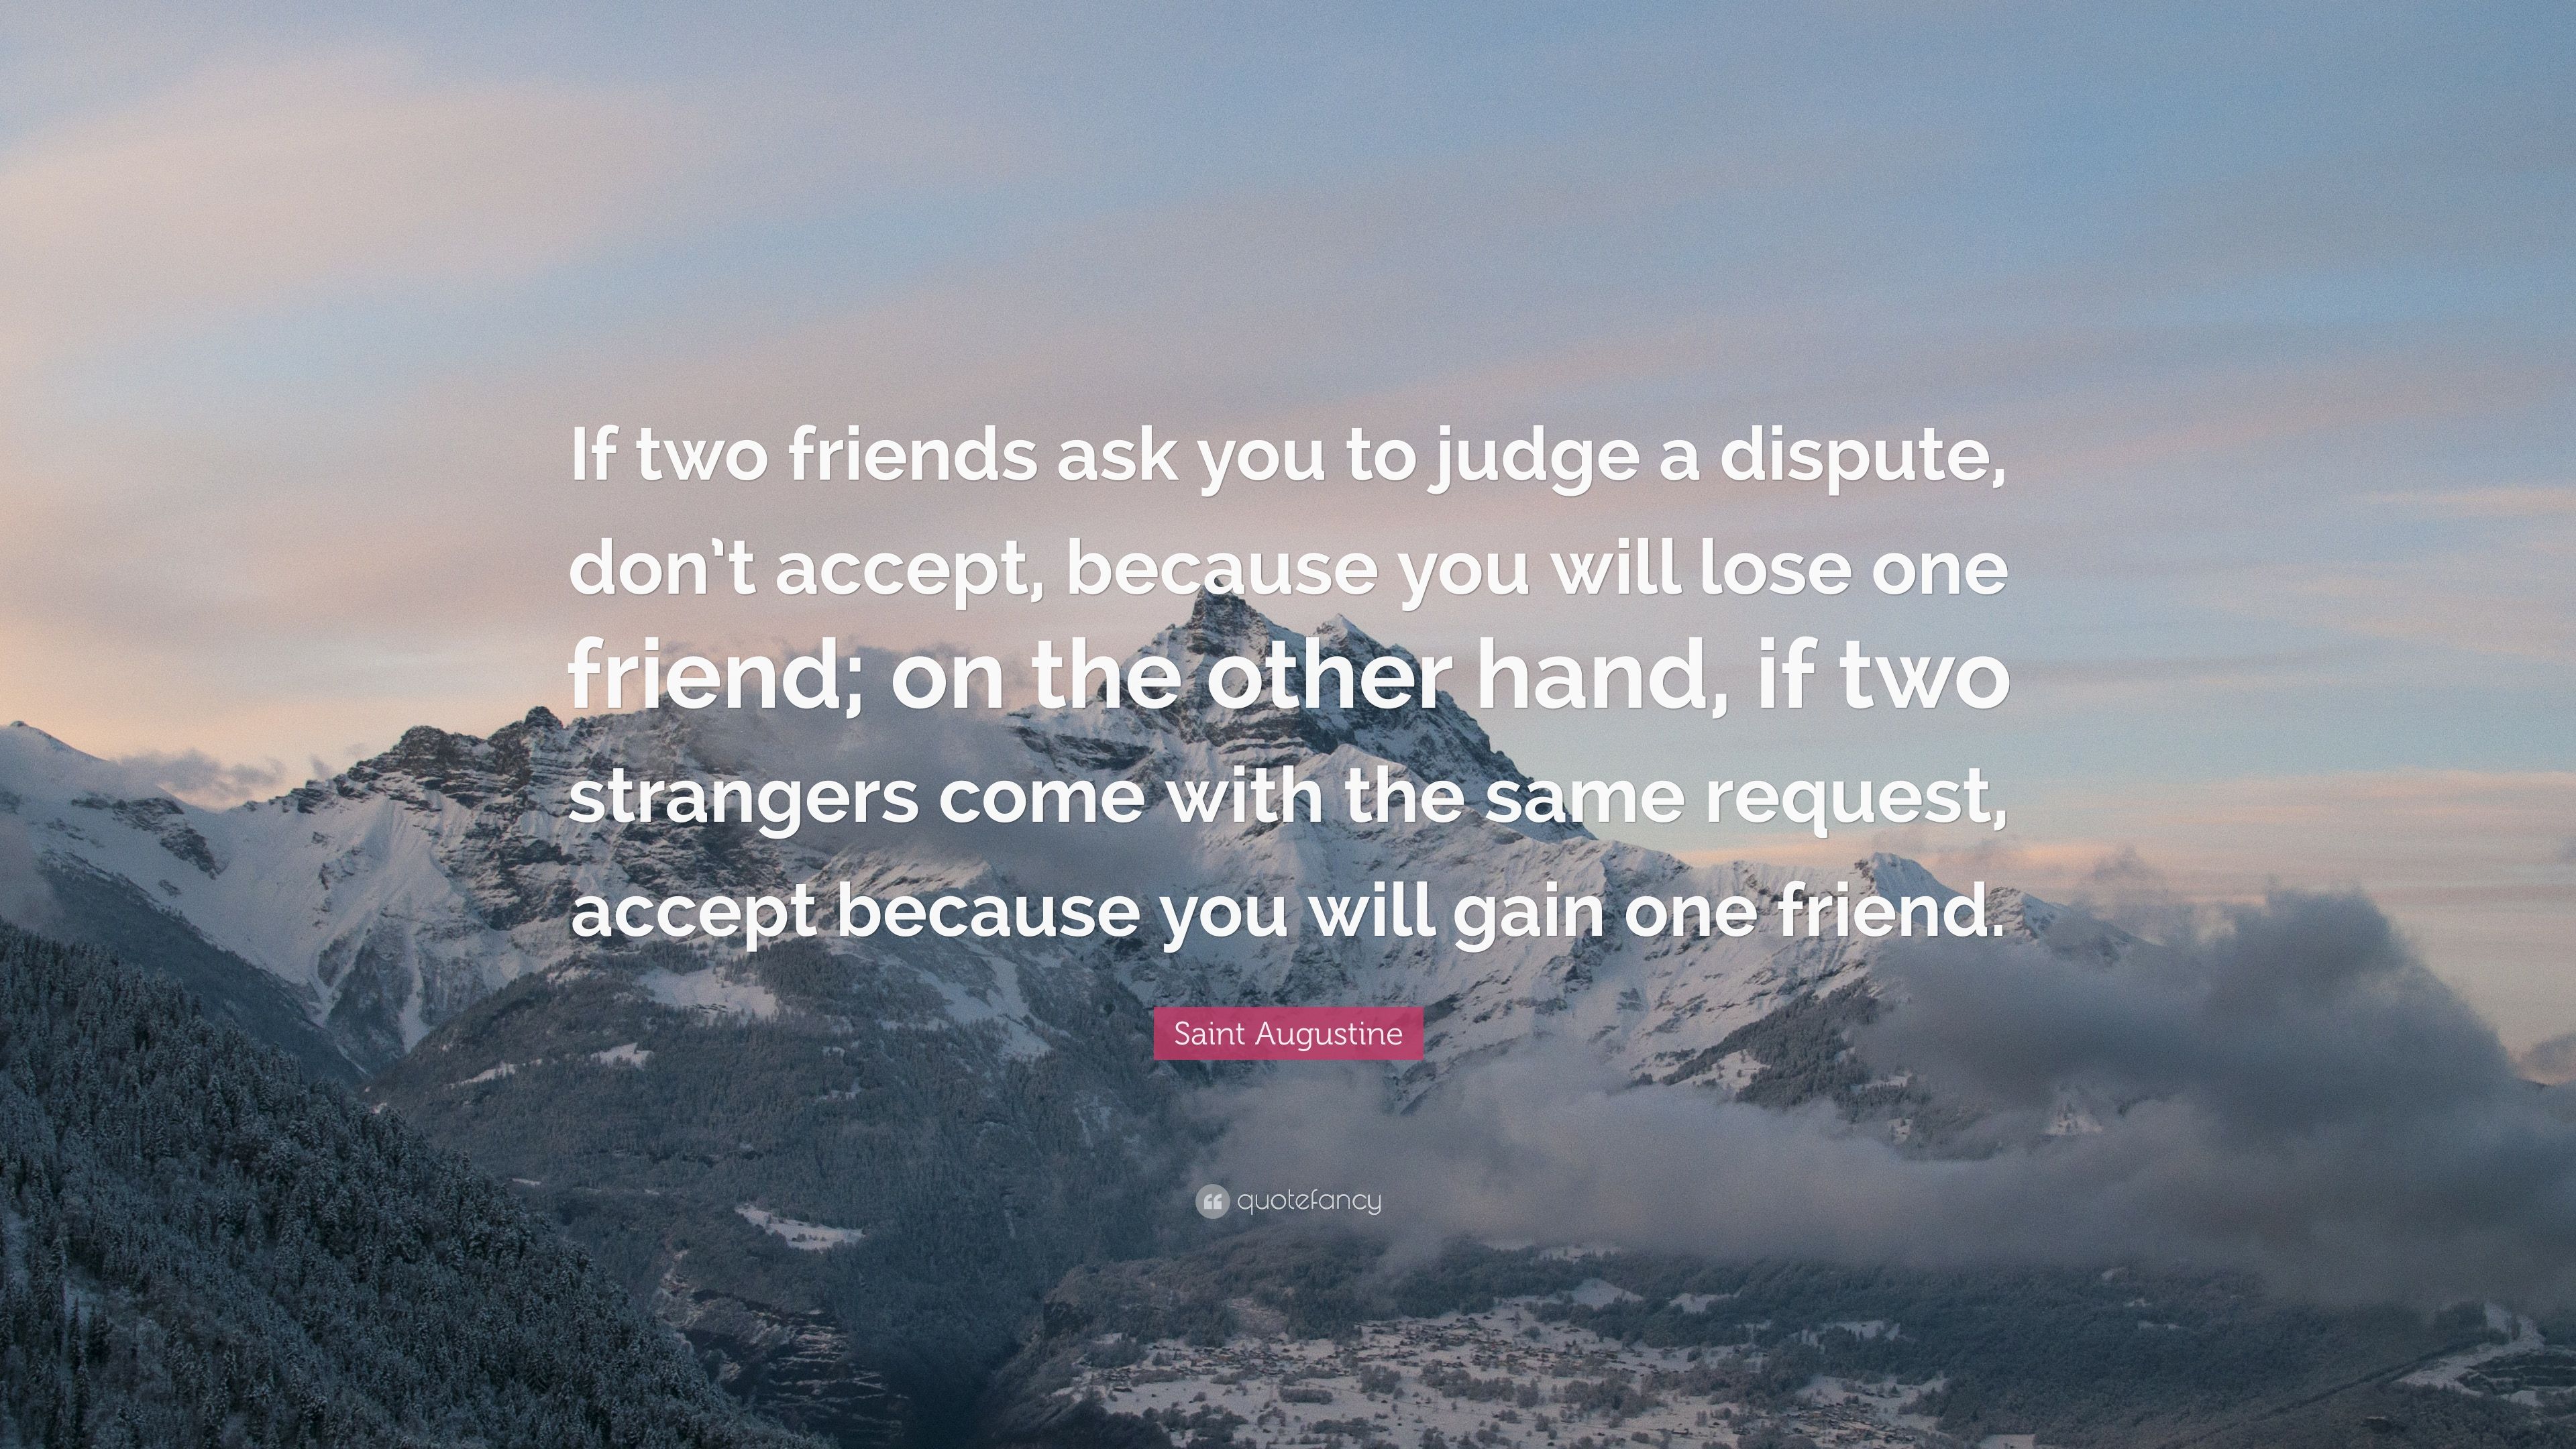 Saint Augustine Quote: “If two friends ask you to judge a dispute